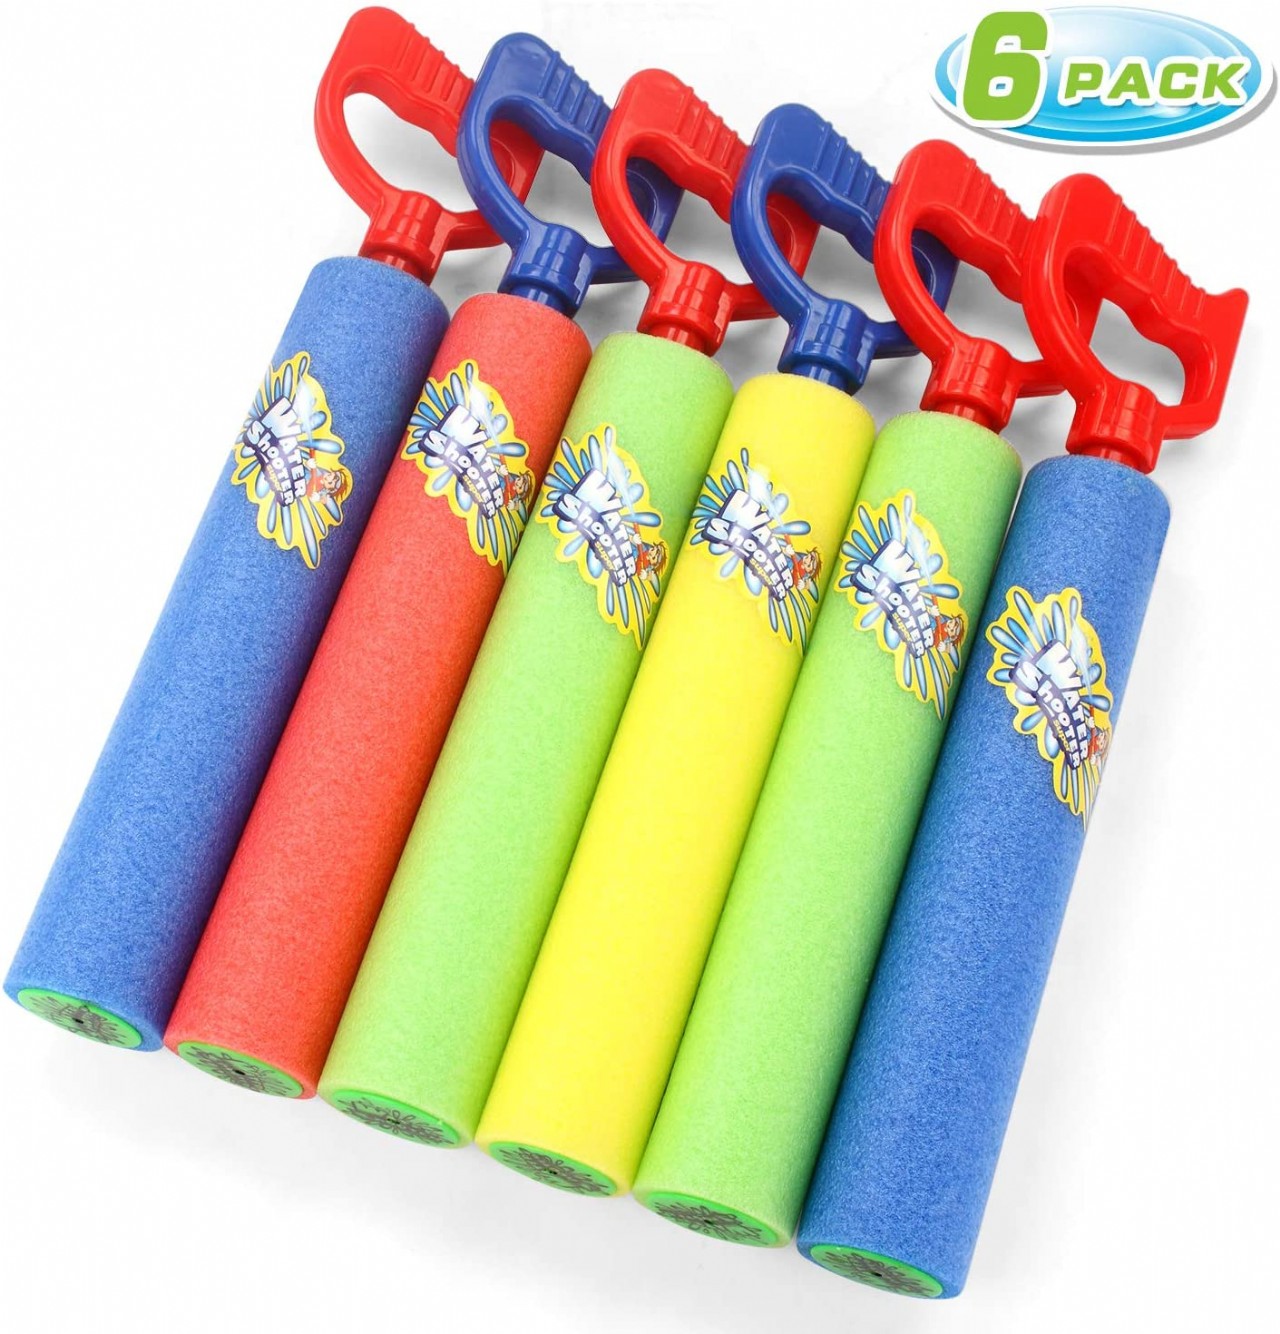 Fun-Here Water Guns Shooter 6 Pack, Super Foam Soakers Blaster Squirt Guns, Pool Noodles Toy